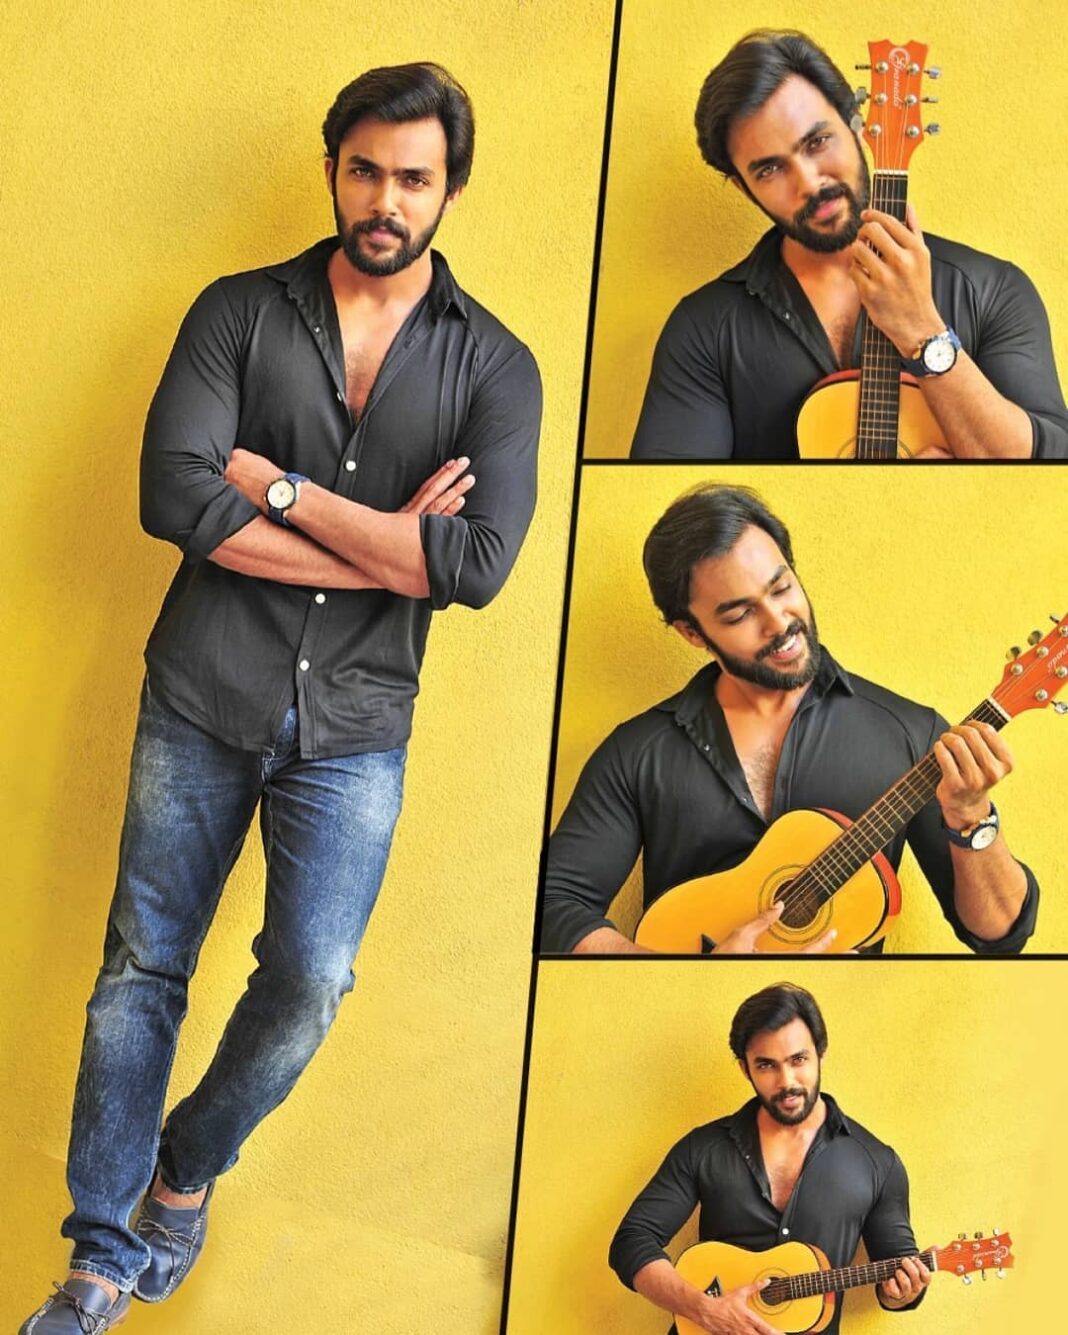 Arav Instagram - From the Exclusive shoot for Ananda Vikatan Magazine. Check out my latest interview in the recent issue @anandavikatan